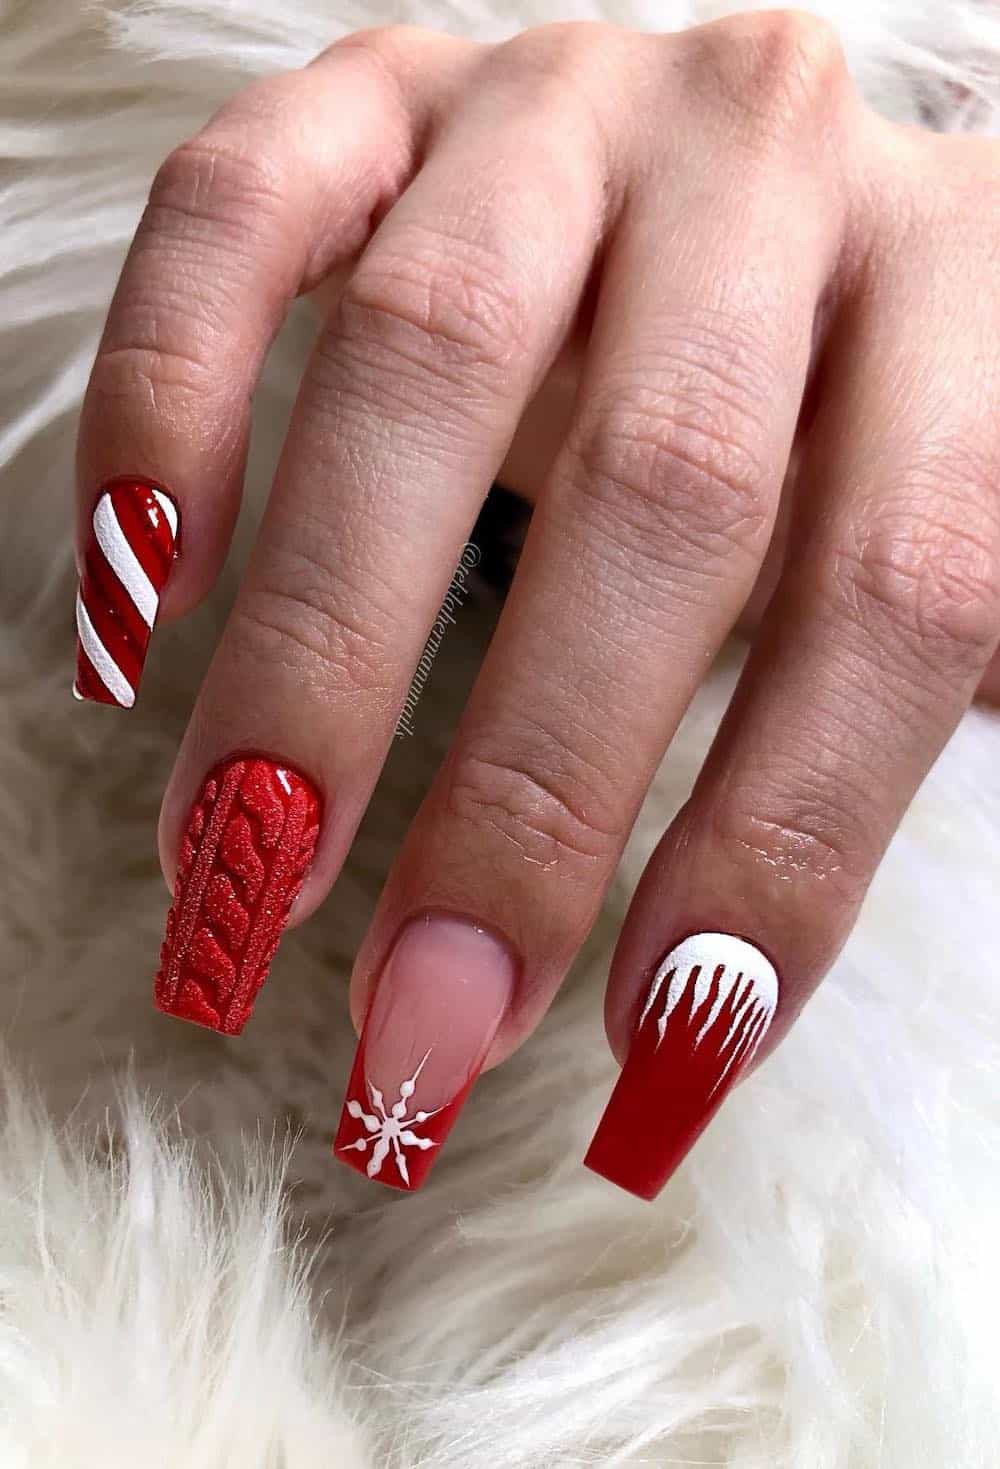 Bright red manicure with white snowflakes, candy cane details, sweater details and snow details.